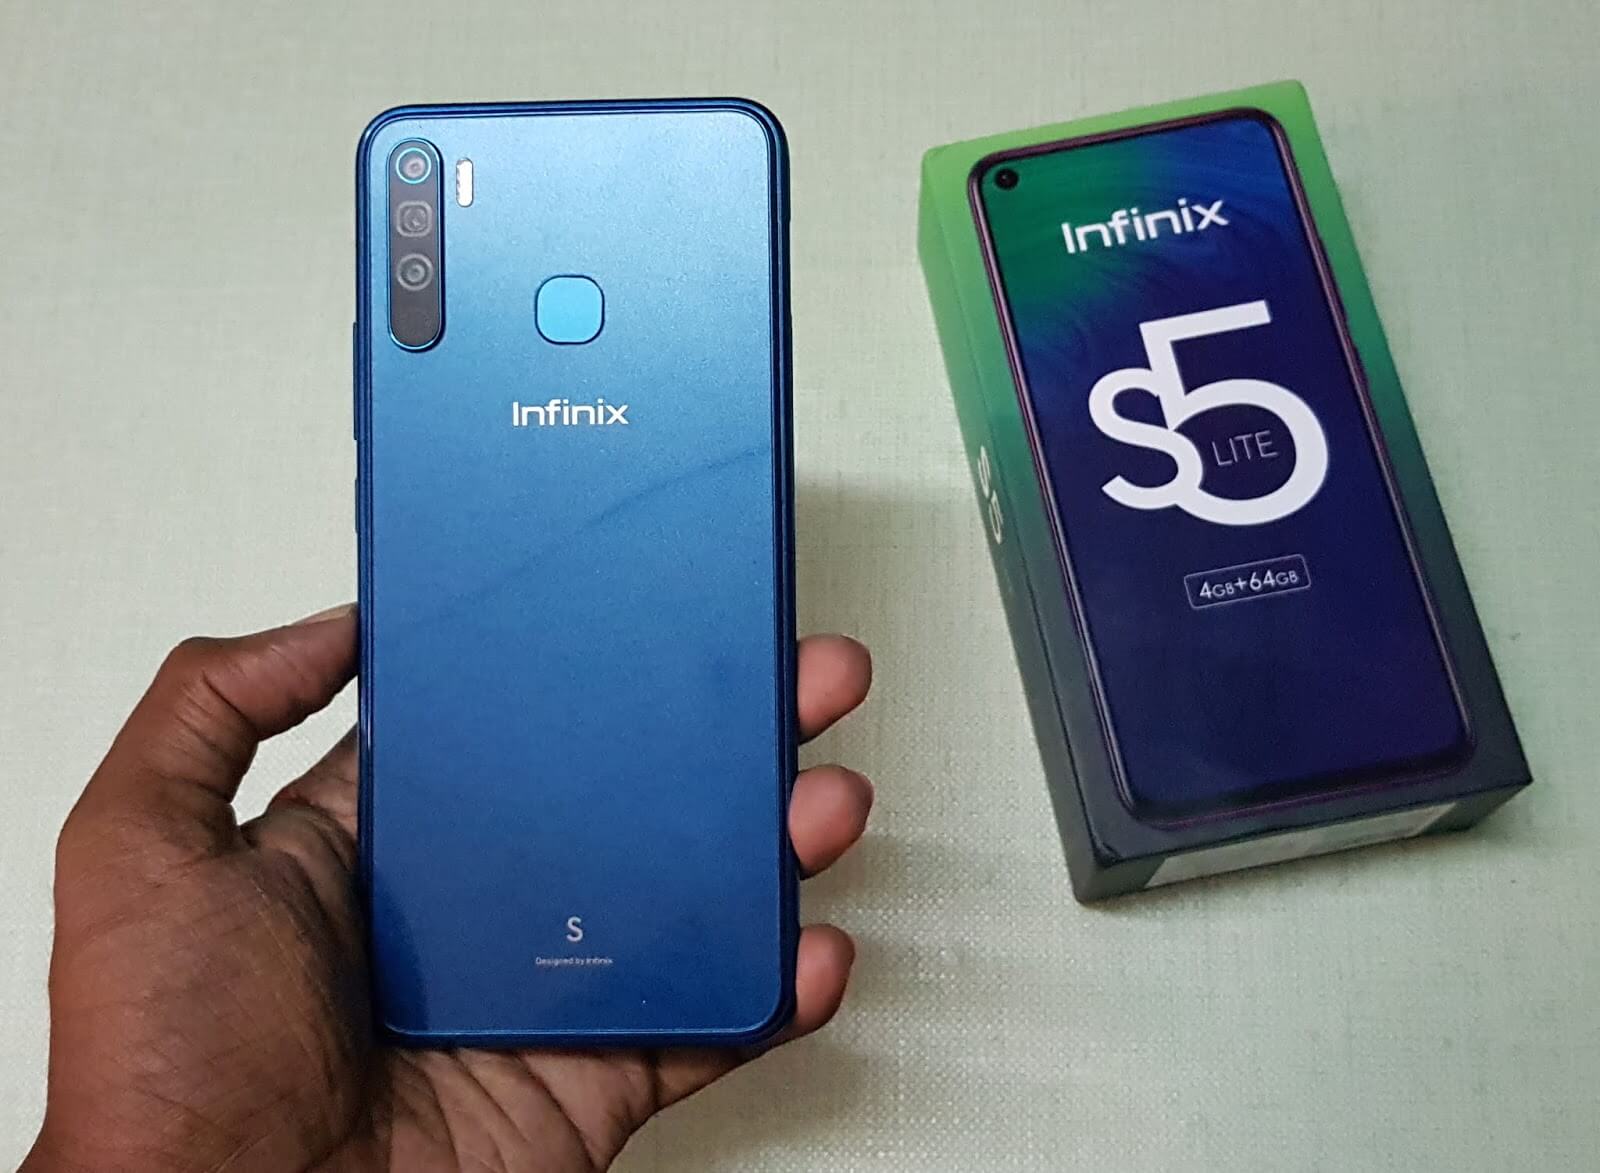 Infinix S5 price in Ghana, its features and specifications